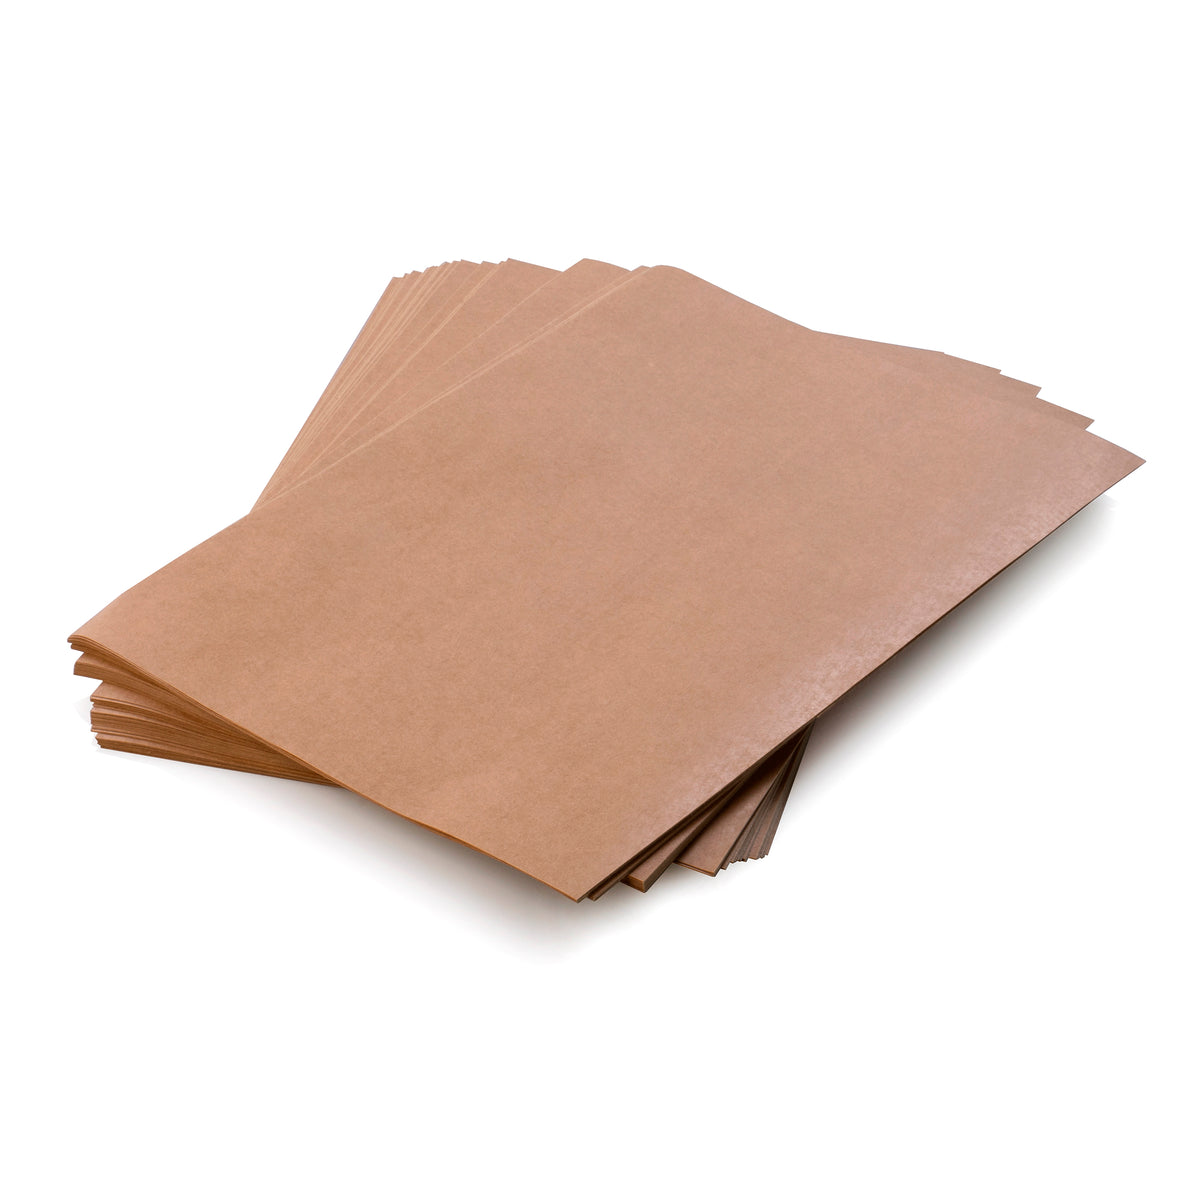 Self-adhesive kraft paper A4 210x297mm 100 sheets smooth paper